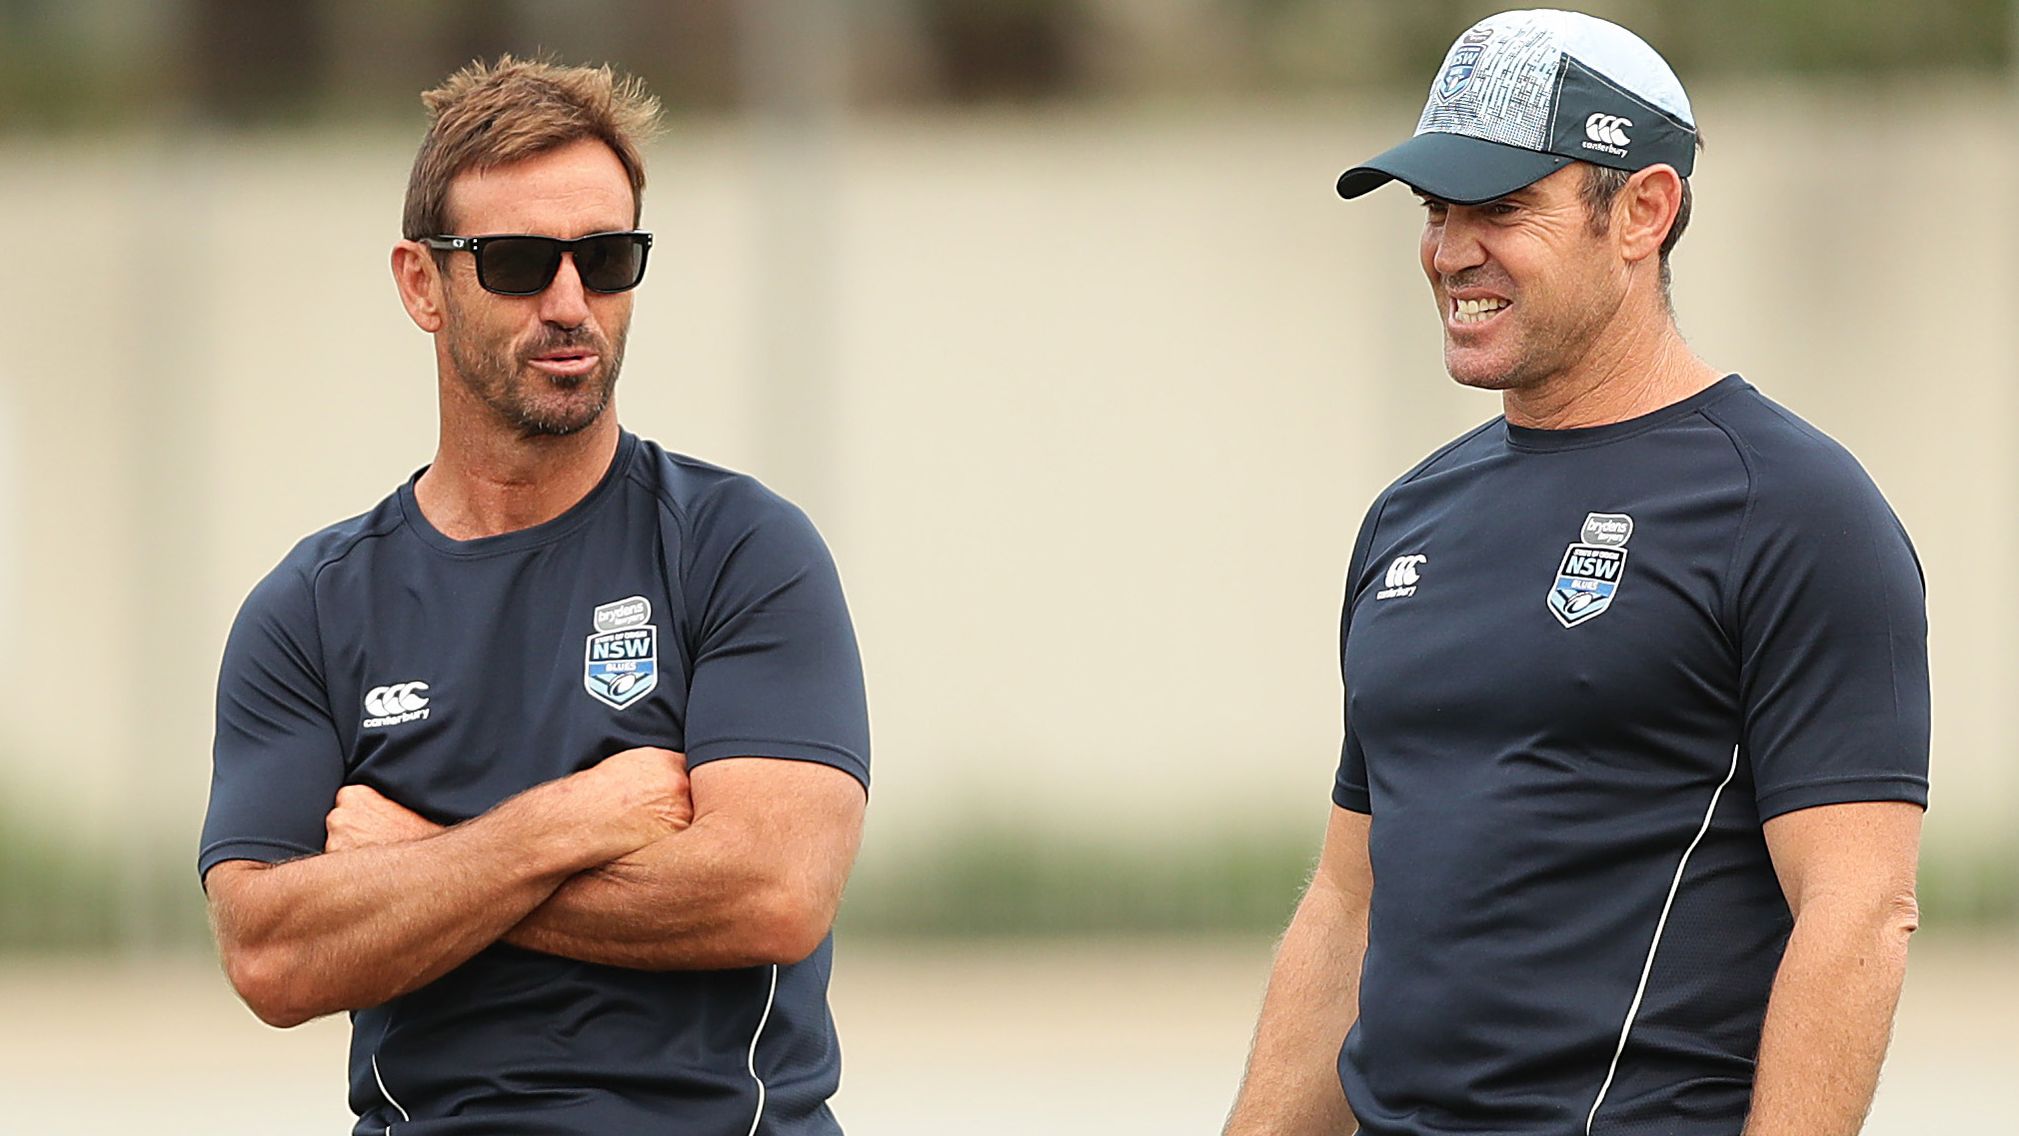 EXCLUSIVE: Andrew Johns blames 'extreme' and 'personal' attacks for Brad Fittler quitting NSW job